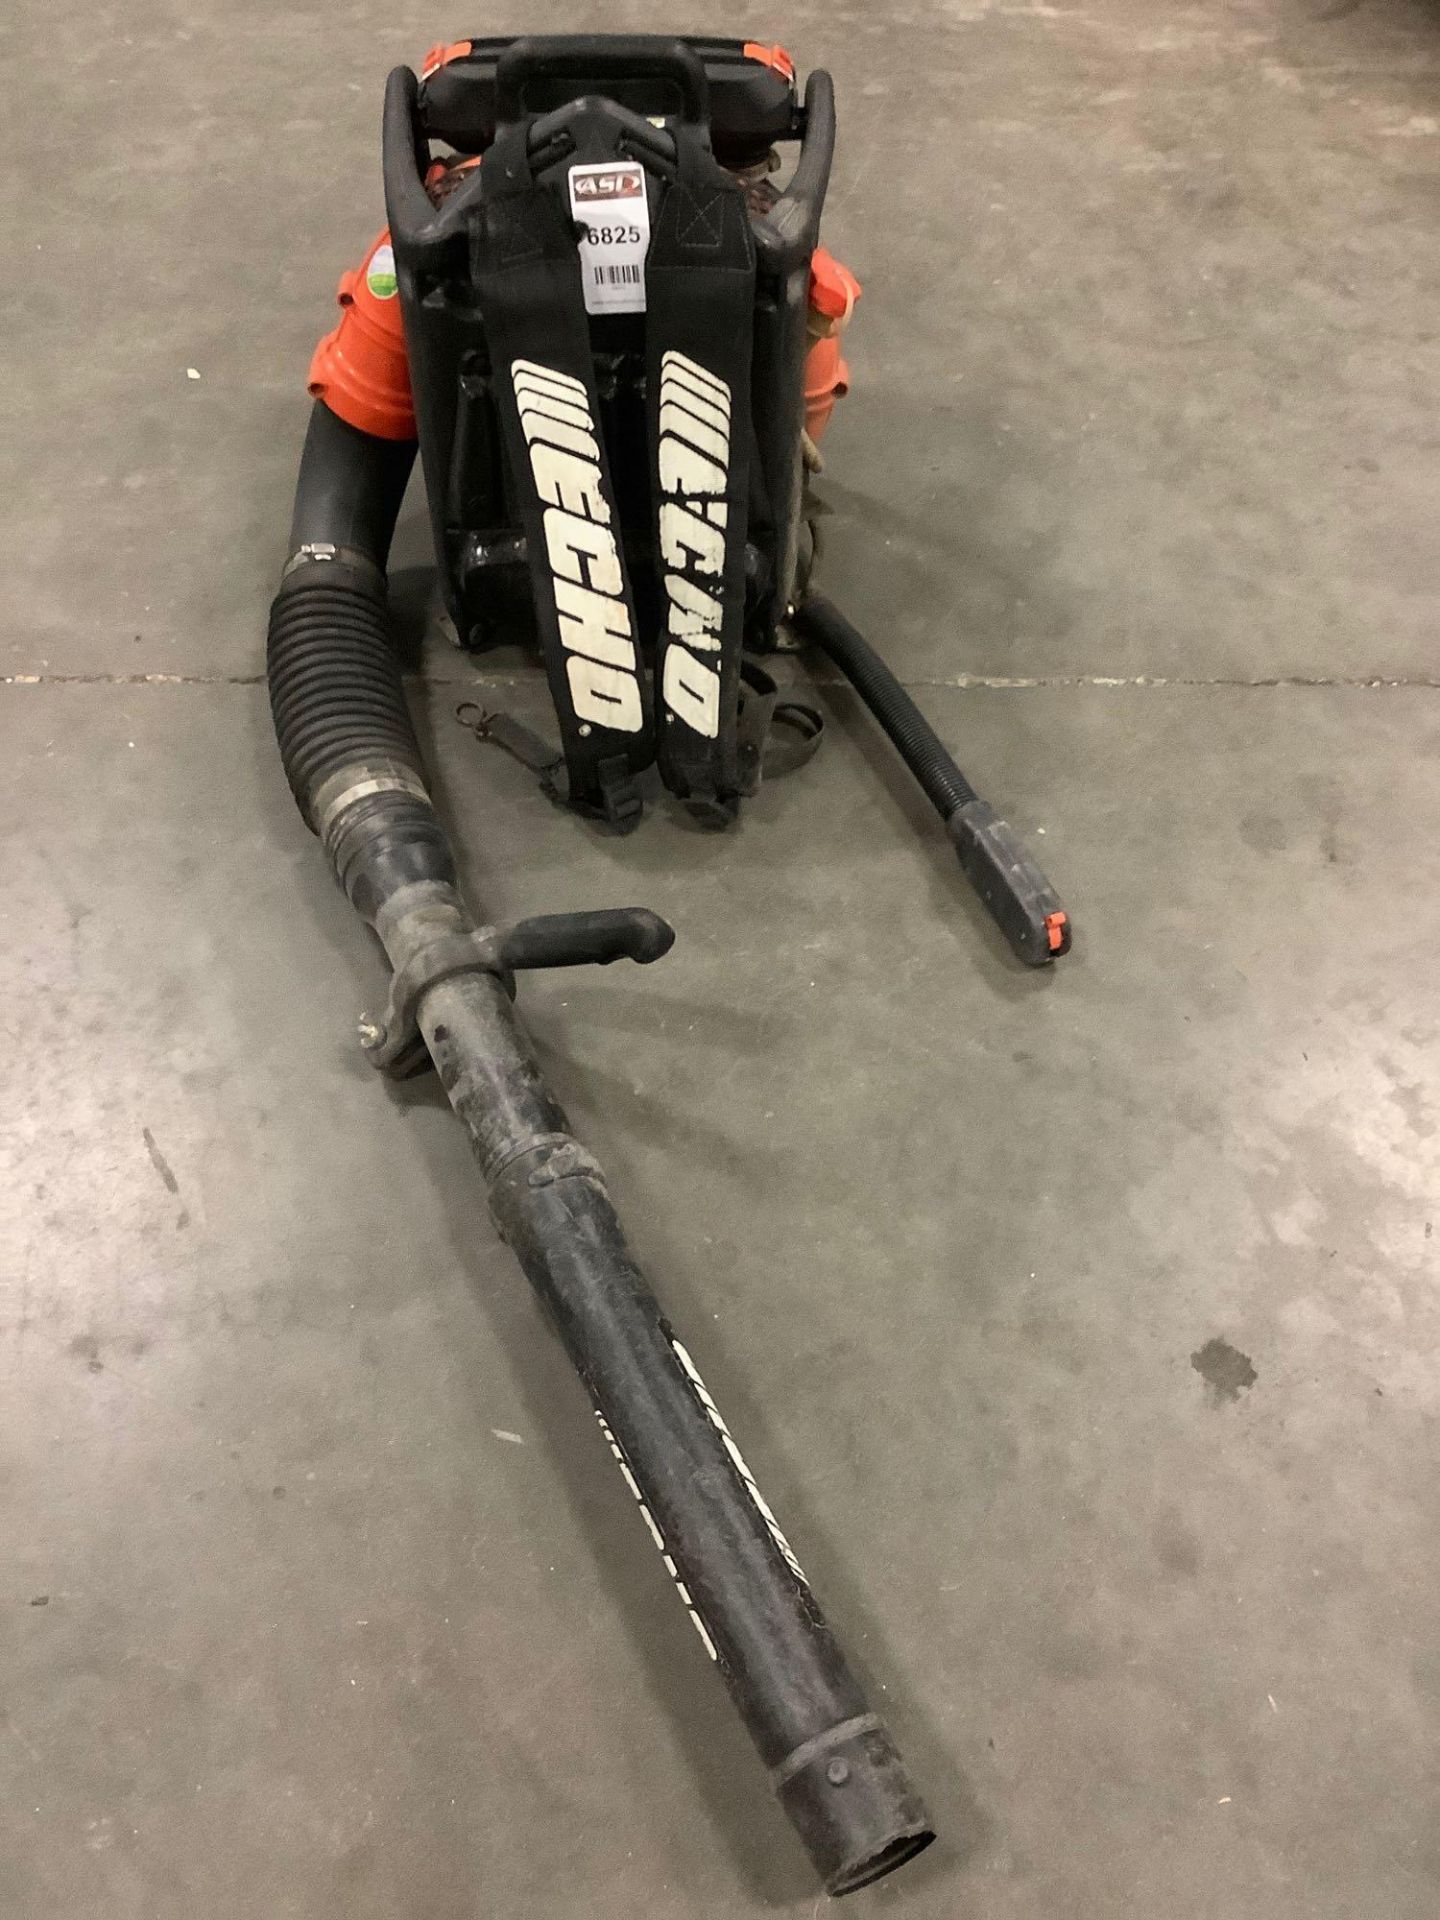 ECHO BACKPACK BLOWER MODEL PB-460 LN , GAS POWERED , RUNS AND OPERATES - Image 5 of 6